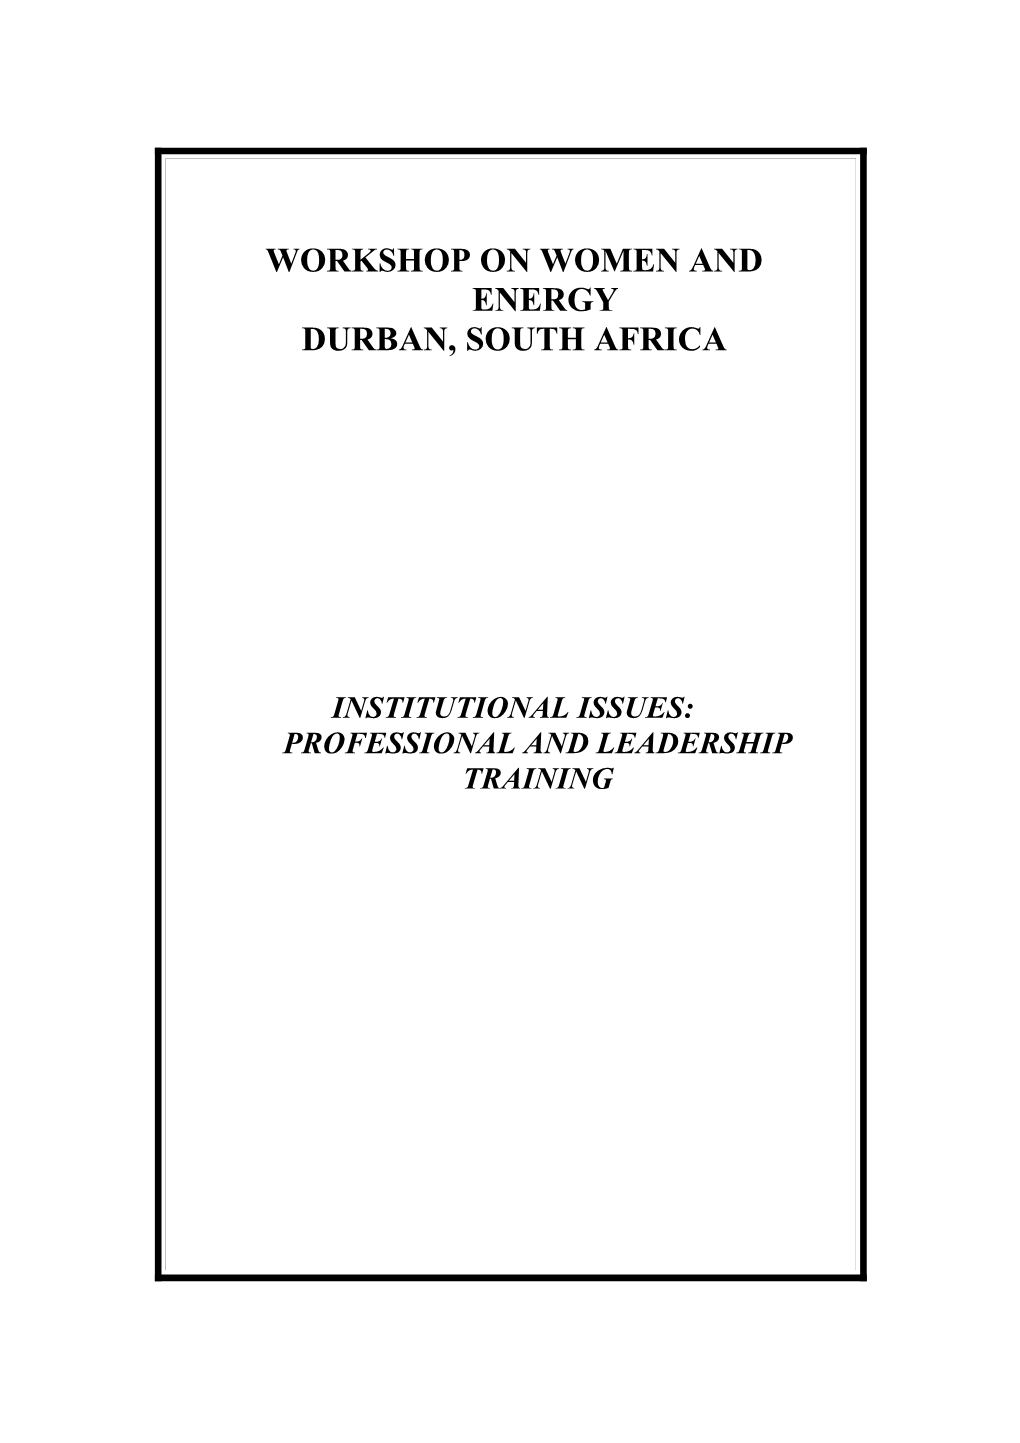 Workshop on Women and Energy